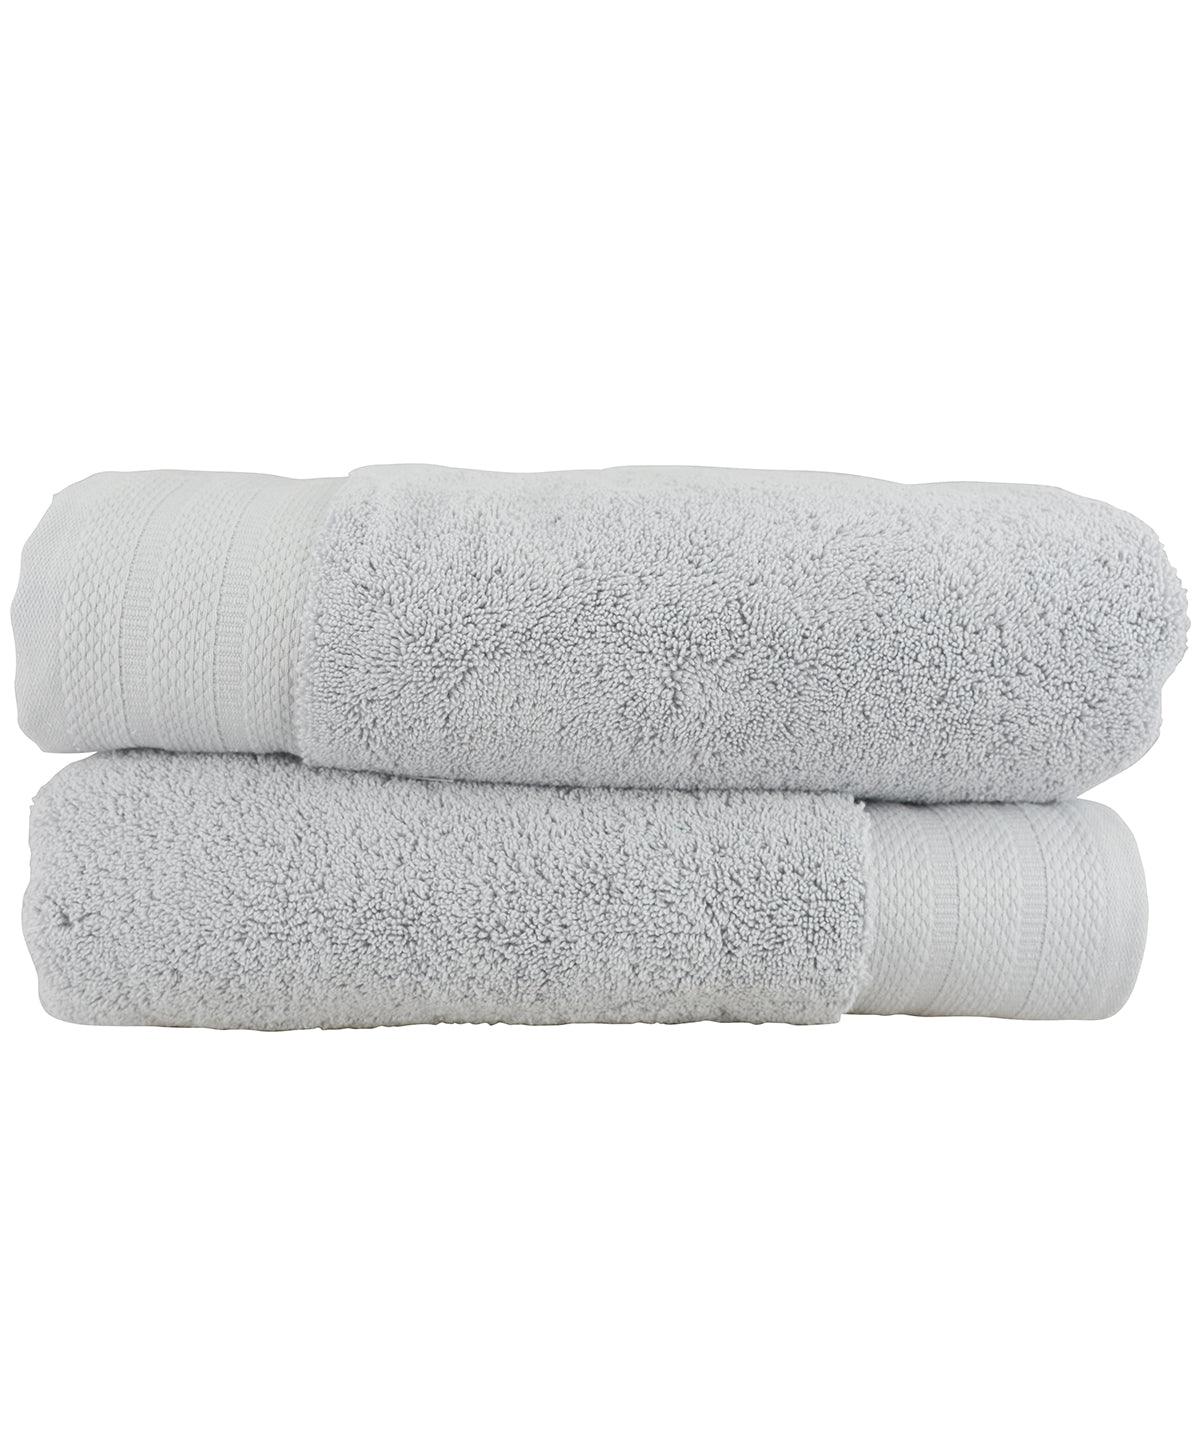 Light Grey - ARTG® Pure luxe bath towel Towels A&R Towels Gifting & Accessories, Homewares & Towelling Schoolwear Centres